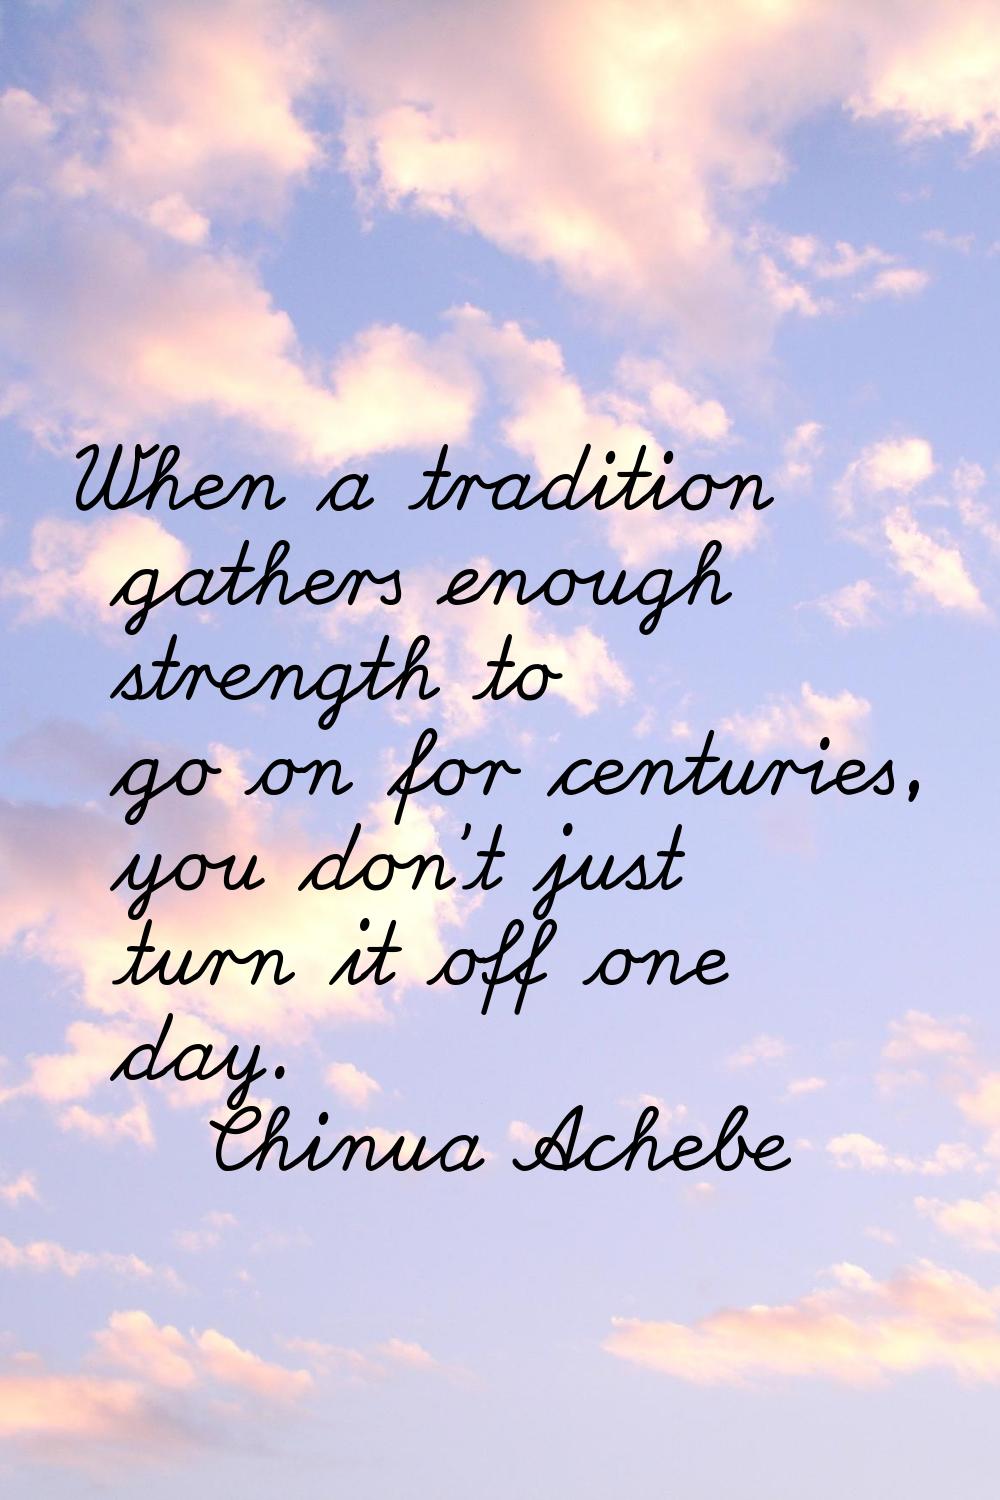 When a tradition gathers enough strength to go on for centuries, you don't just turn it off one day